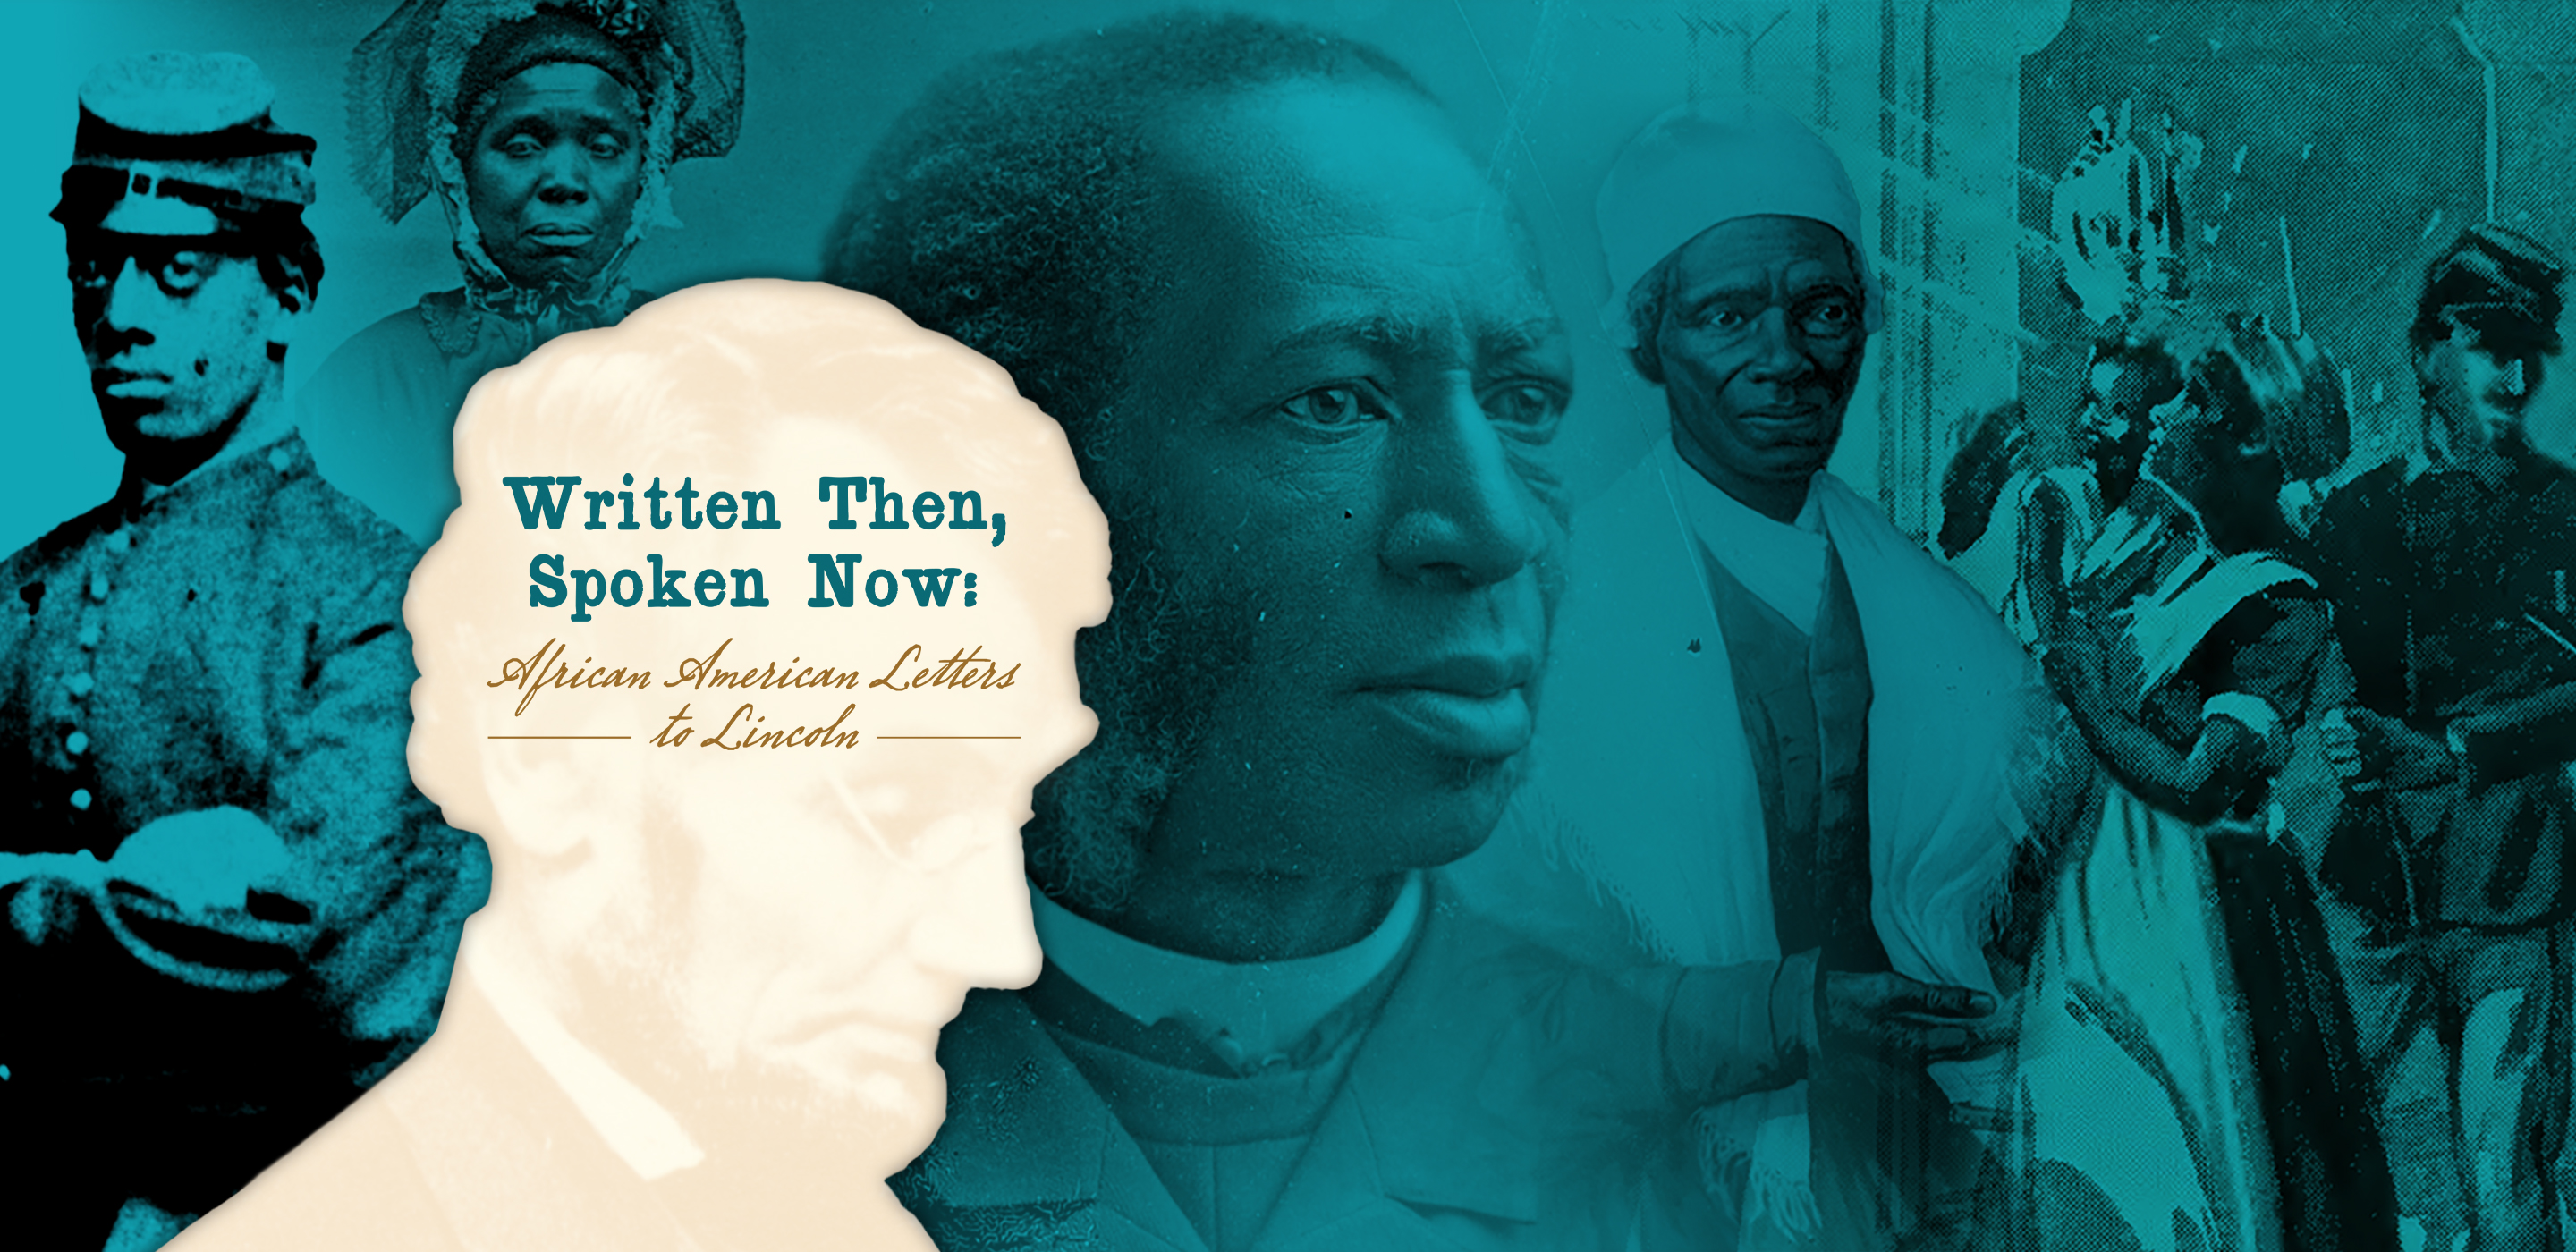 A turquoise-tinged collage of pictures of 19th century African-Americans. In the foreground is a white silhouette of Abraham Lincoln, with the title "Written Then, Spoken Now" overlaid.